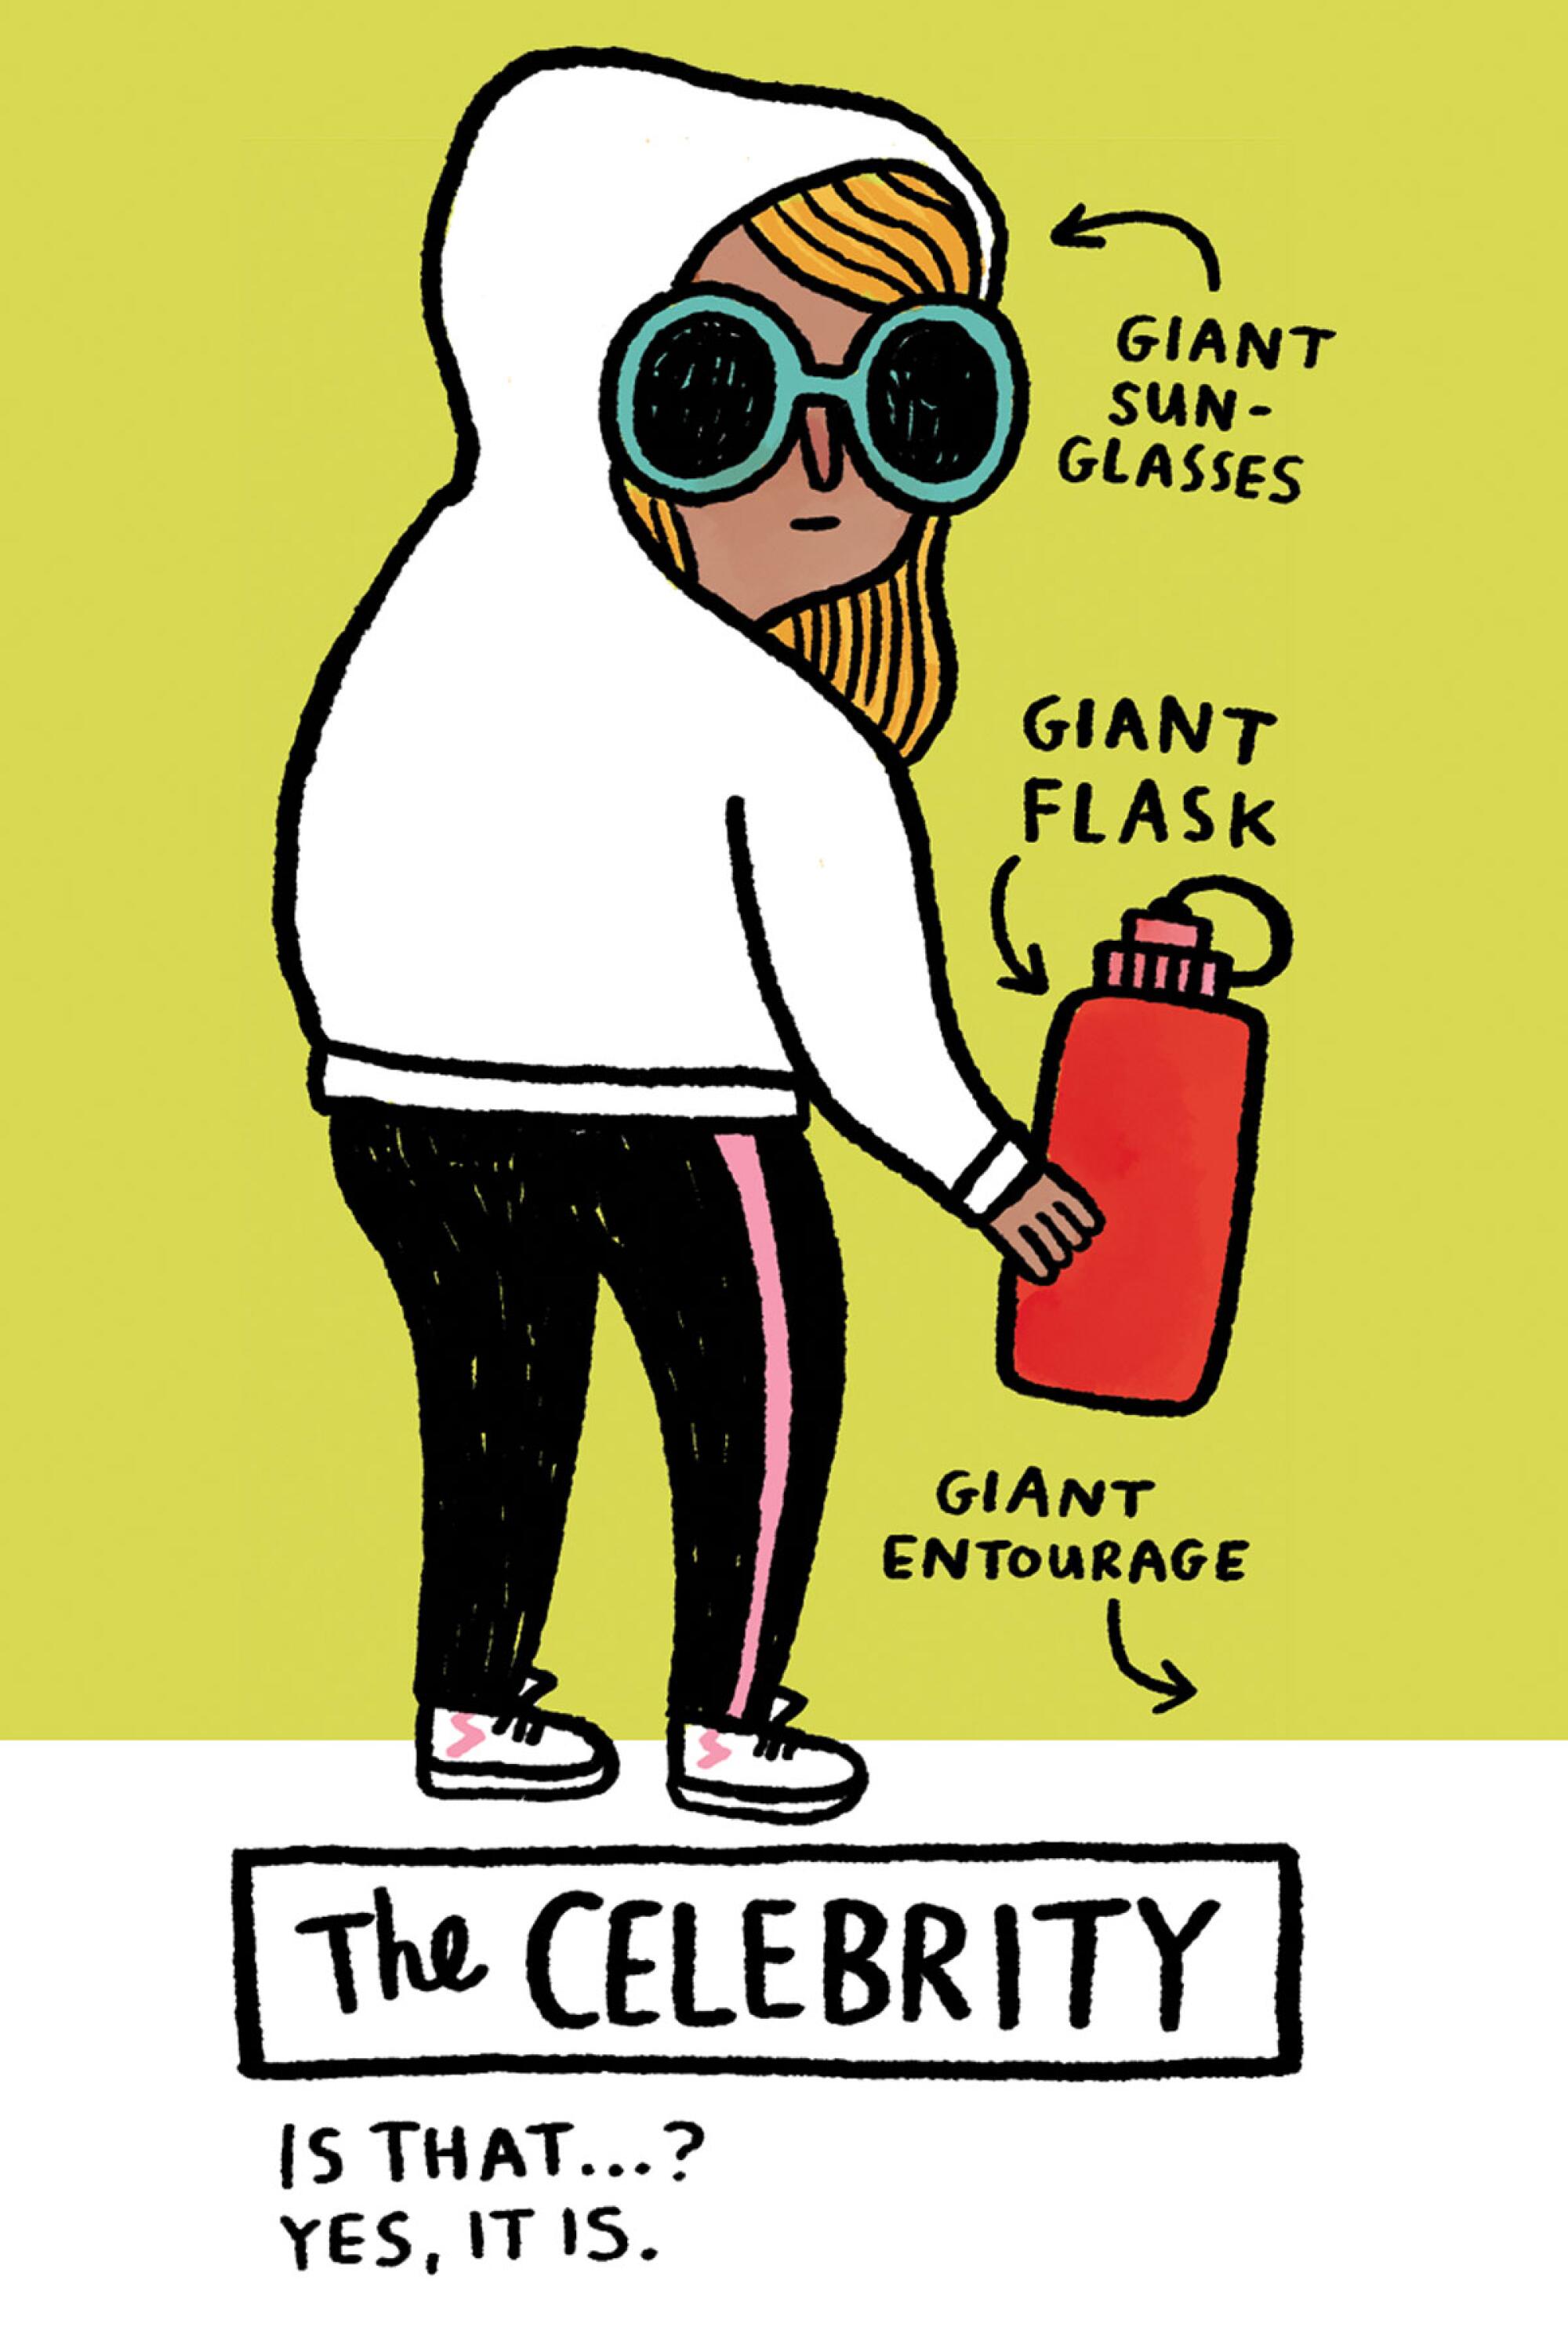 Comic of a stereotypical celebrity hiking